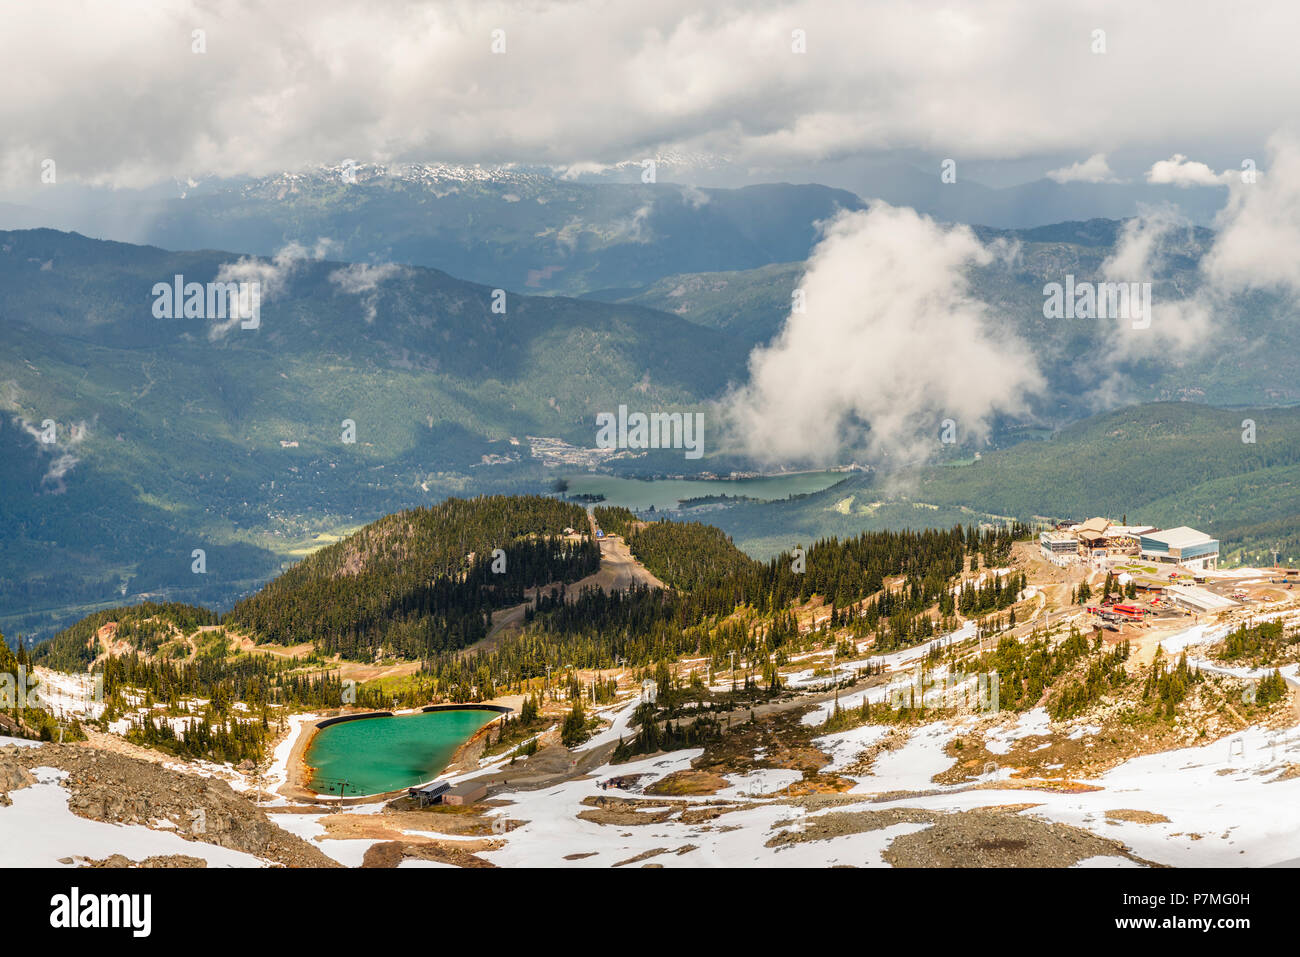 Top view of mountains covered with forests and snow, lakes and roads, white fluffy clouds, buildings of a ski, tourist resort Stock Photo